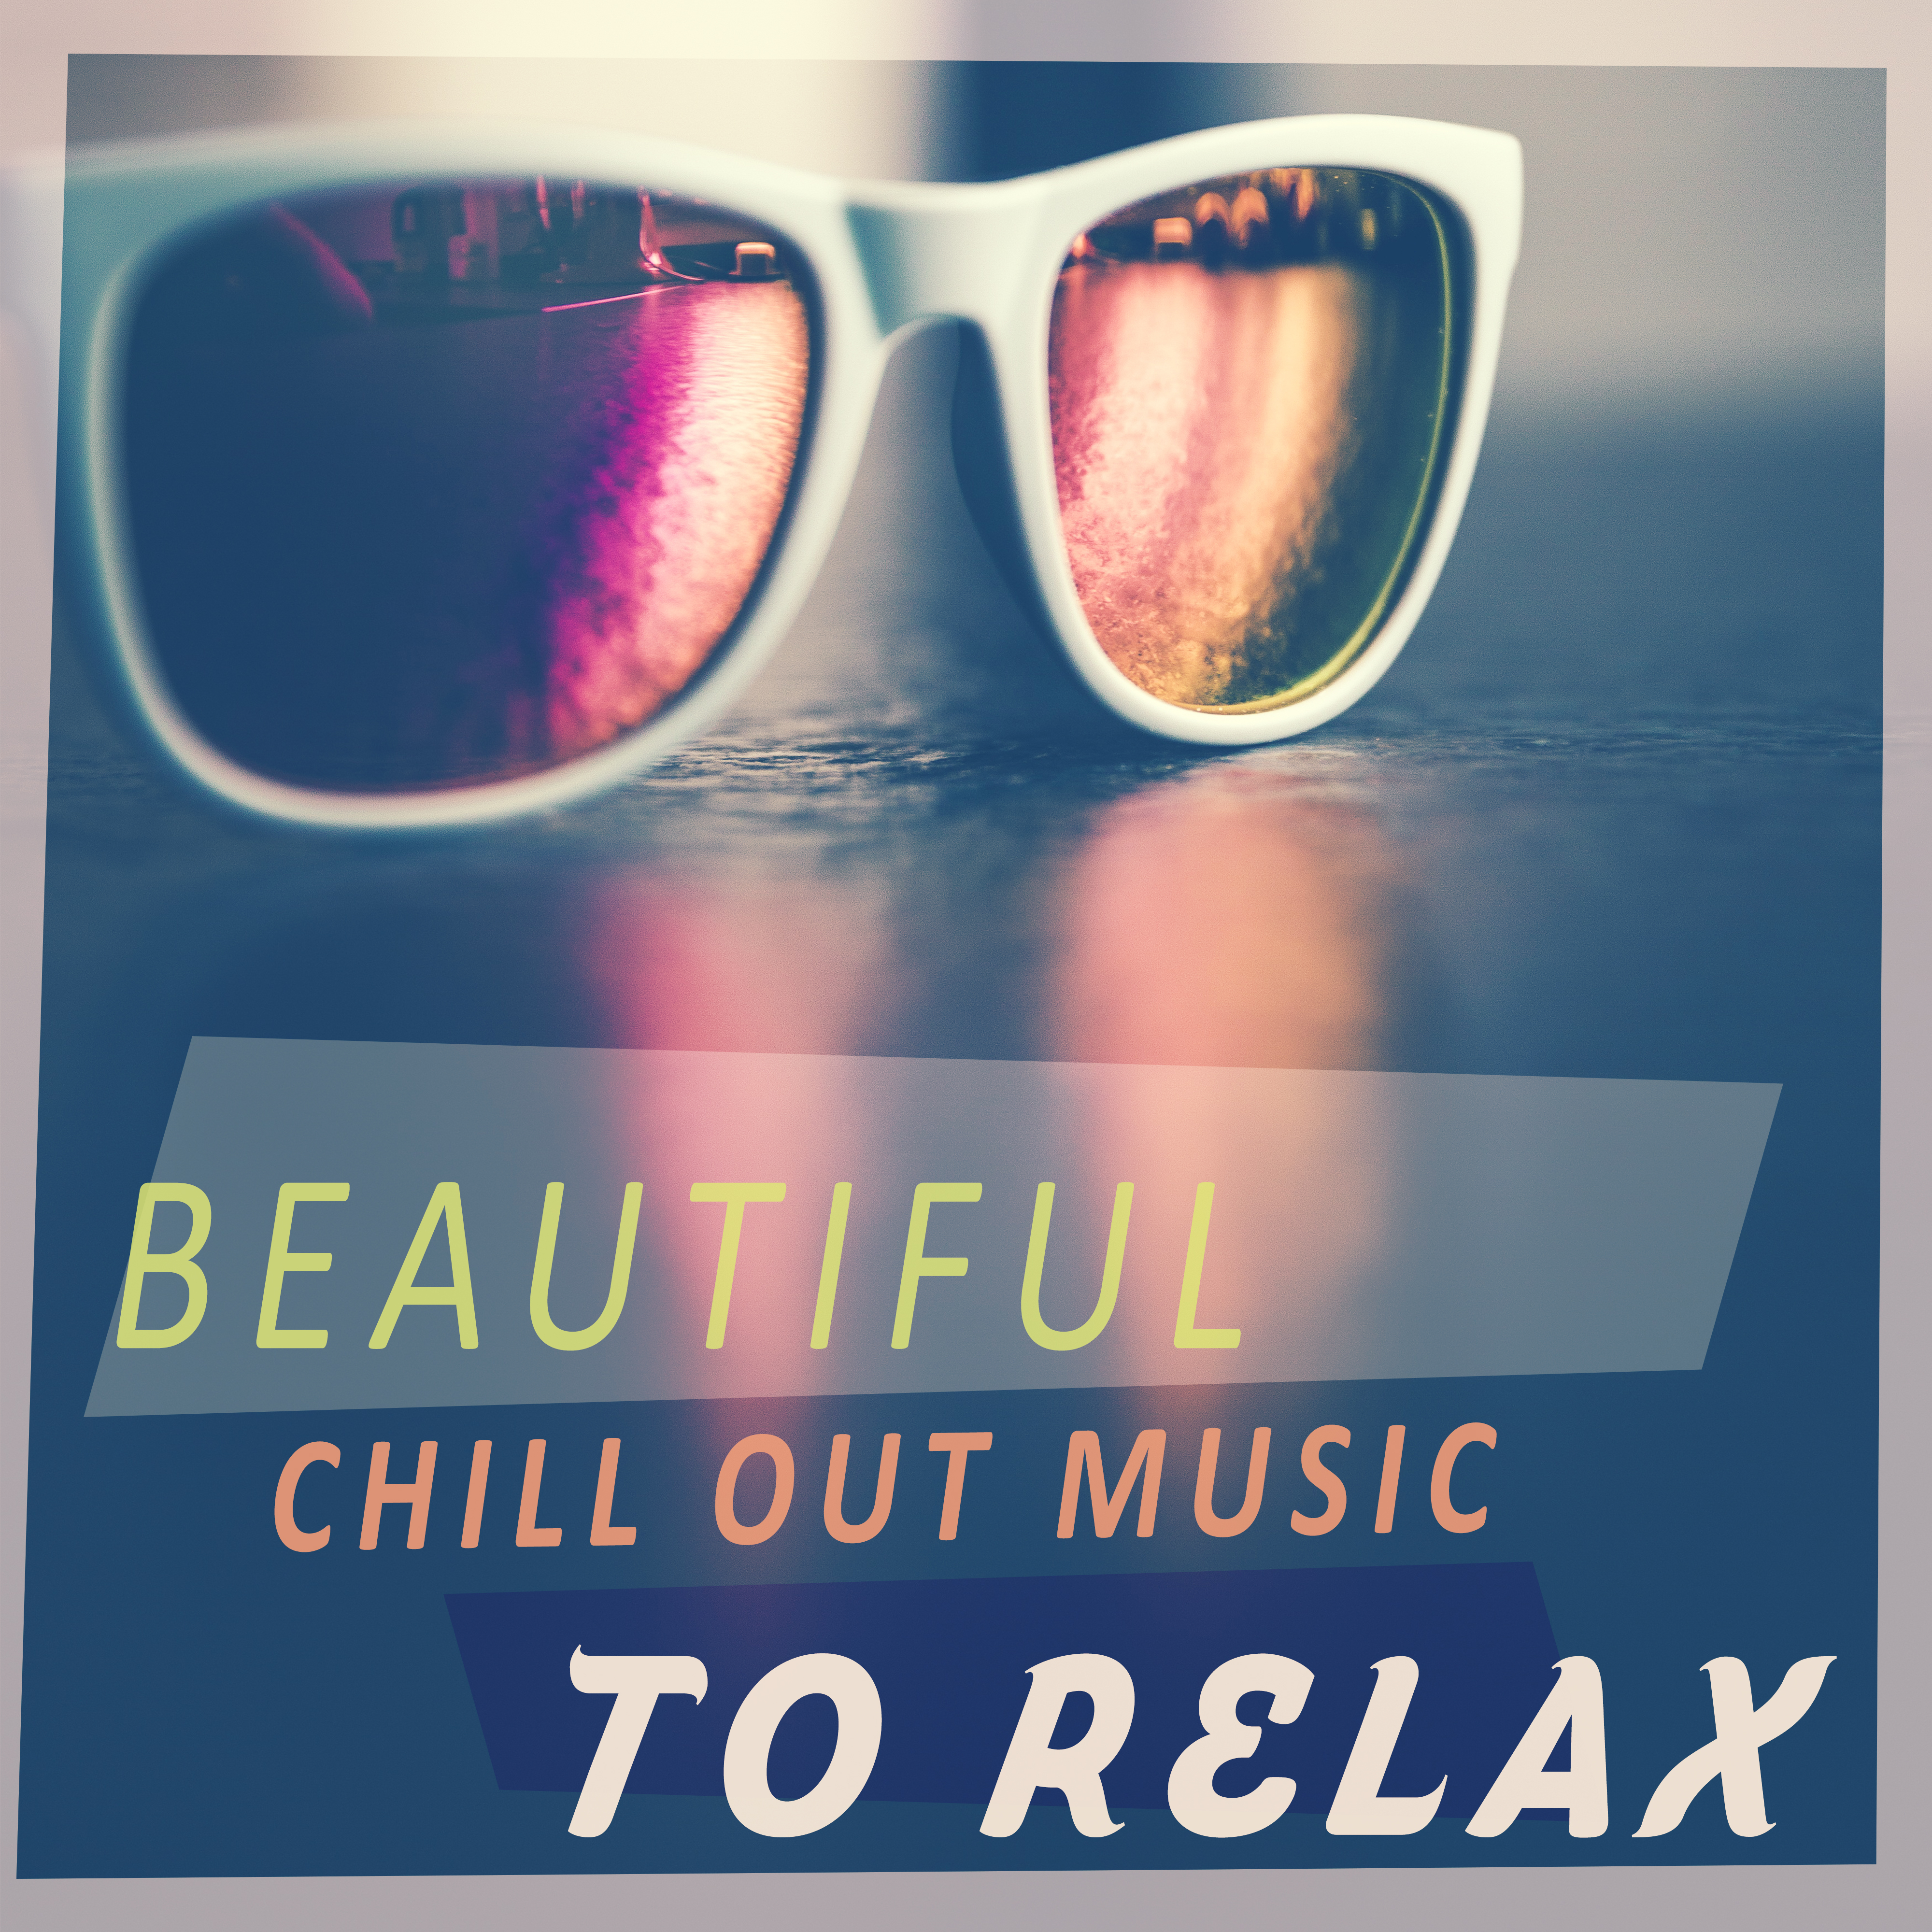 Beautiful Chill Out Music to Relax – Total Relaxation, Chillout Music, Relax Yourself, Calm & Peaceful Mind